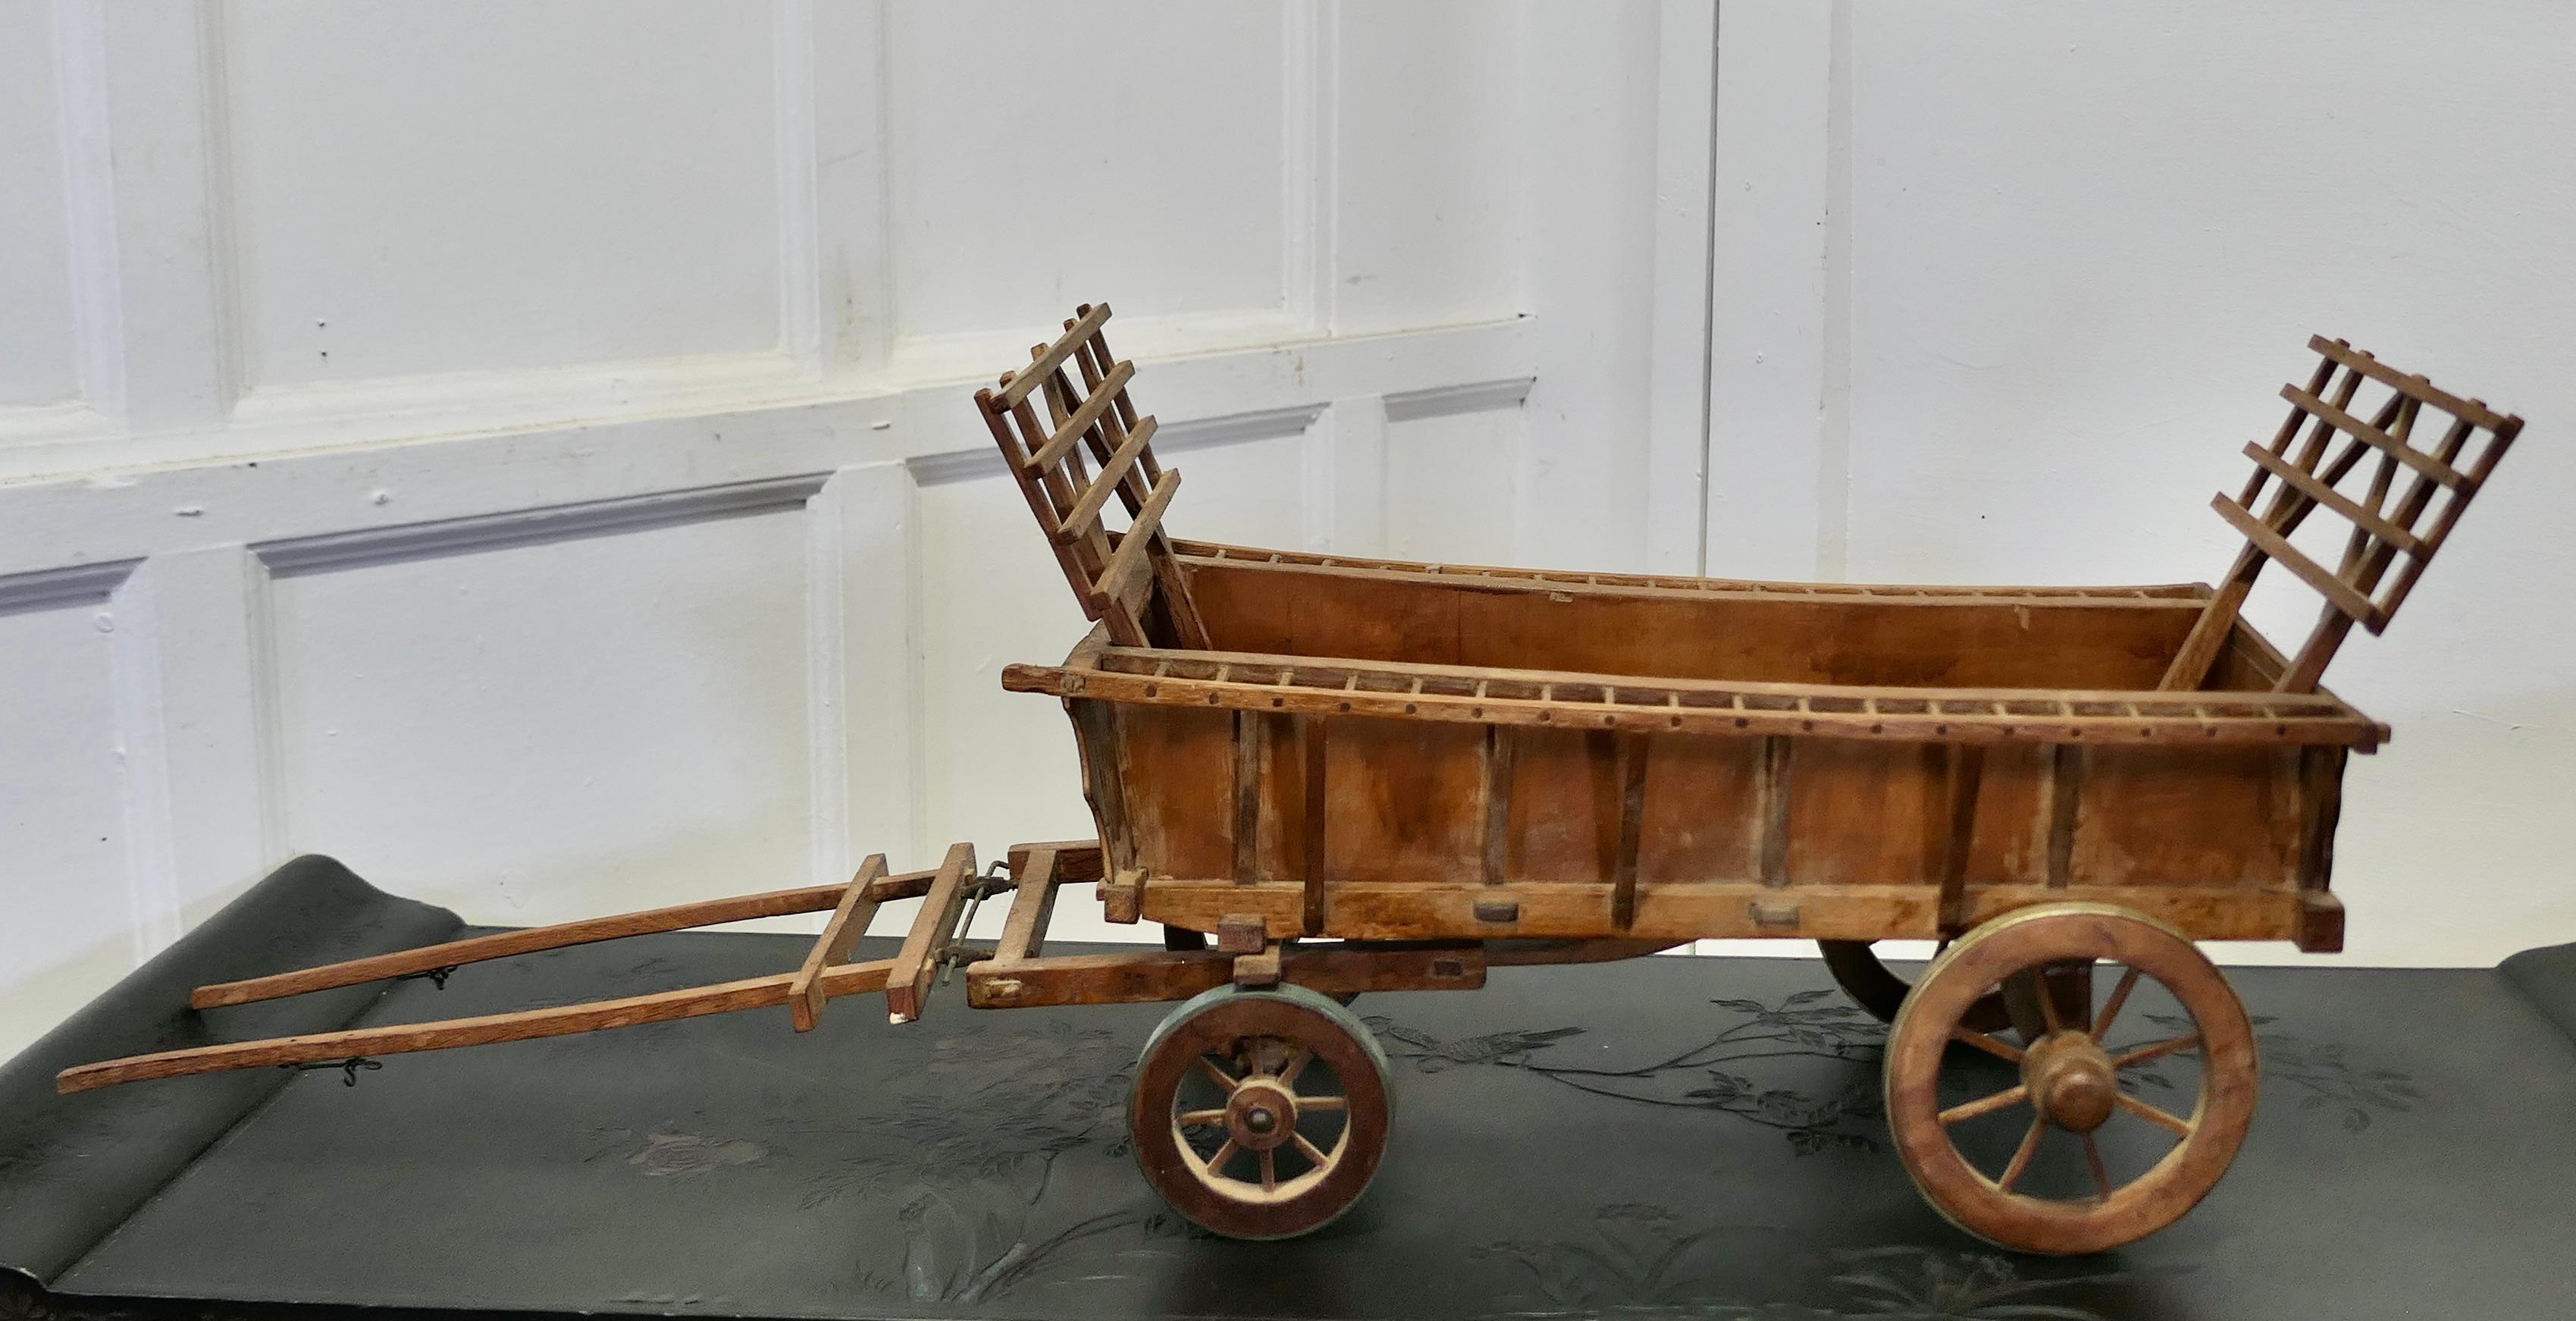 Model Wooden Horse Drawn Hay Cart

This is a trim little Wagon, it is made mainly in Oak and comes in a natural wood finish, with removable hay gates and metal bound wheels
This charming little cart would make an excellent display piece
The cart is